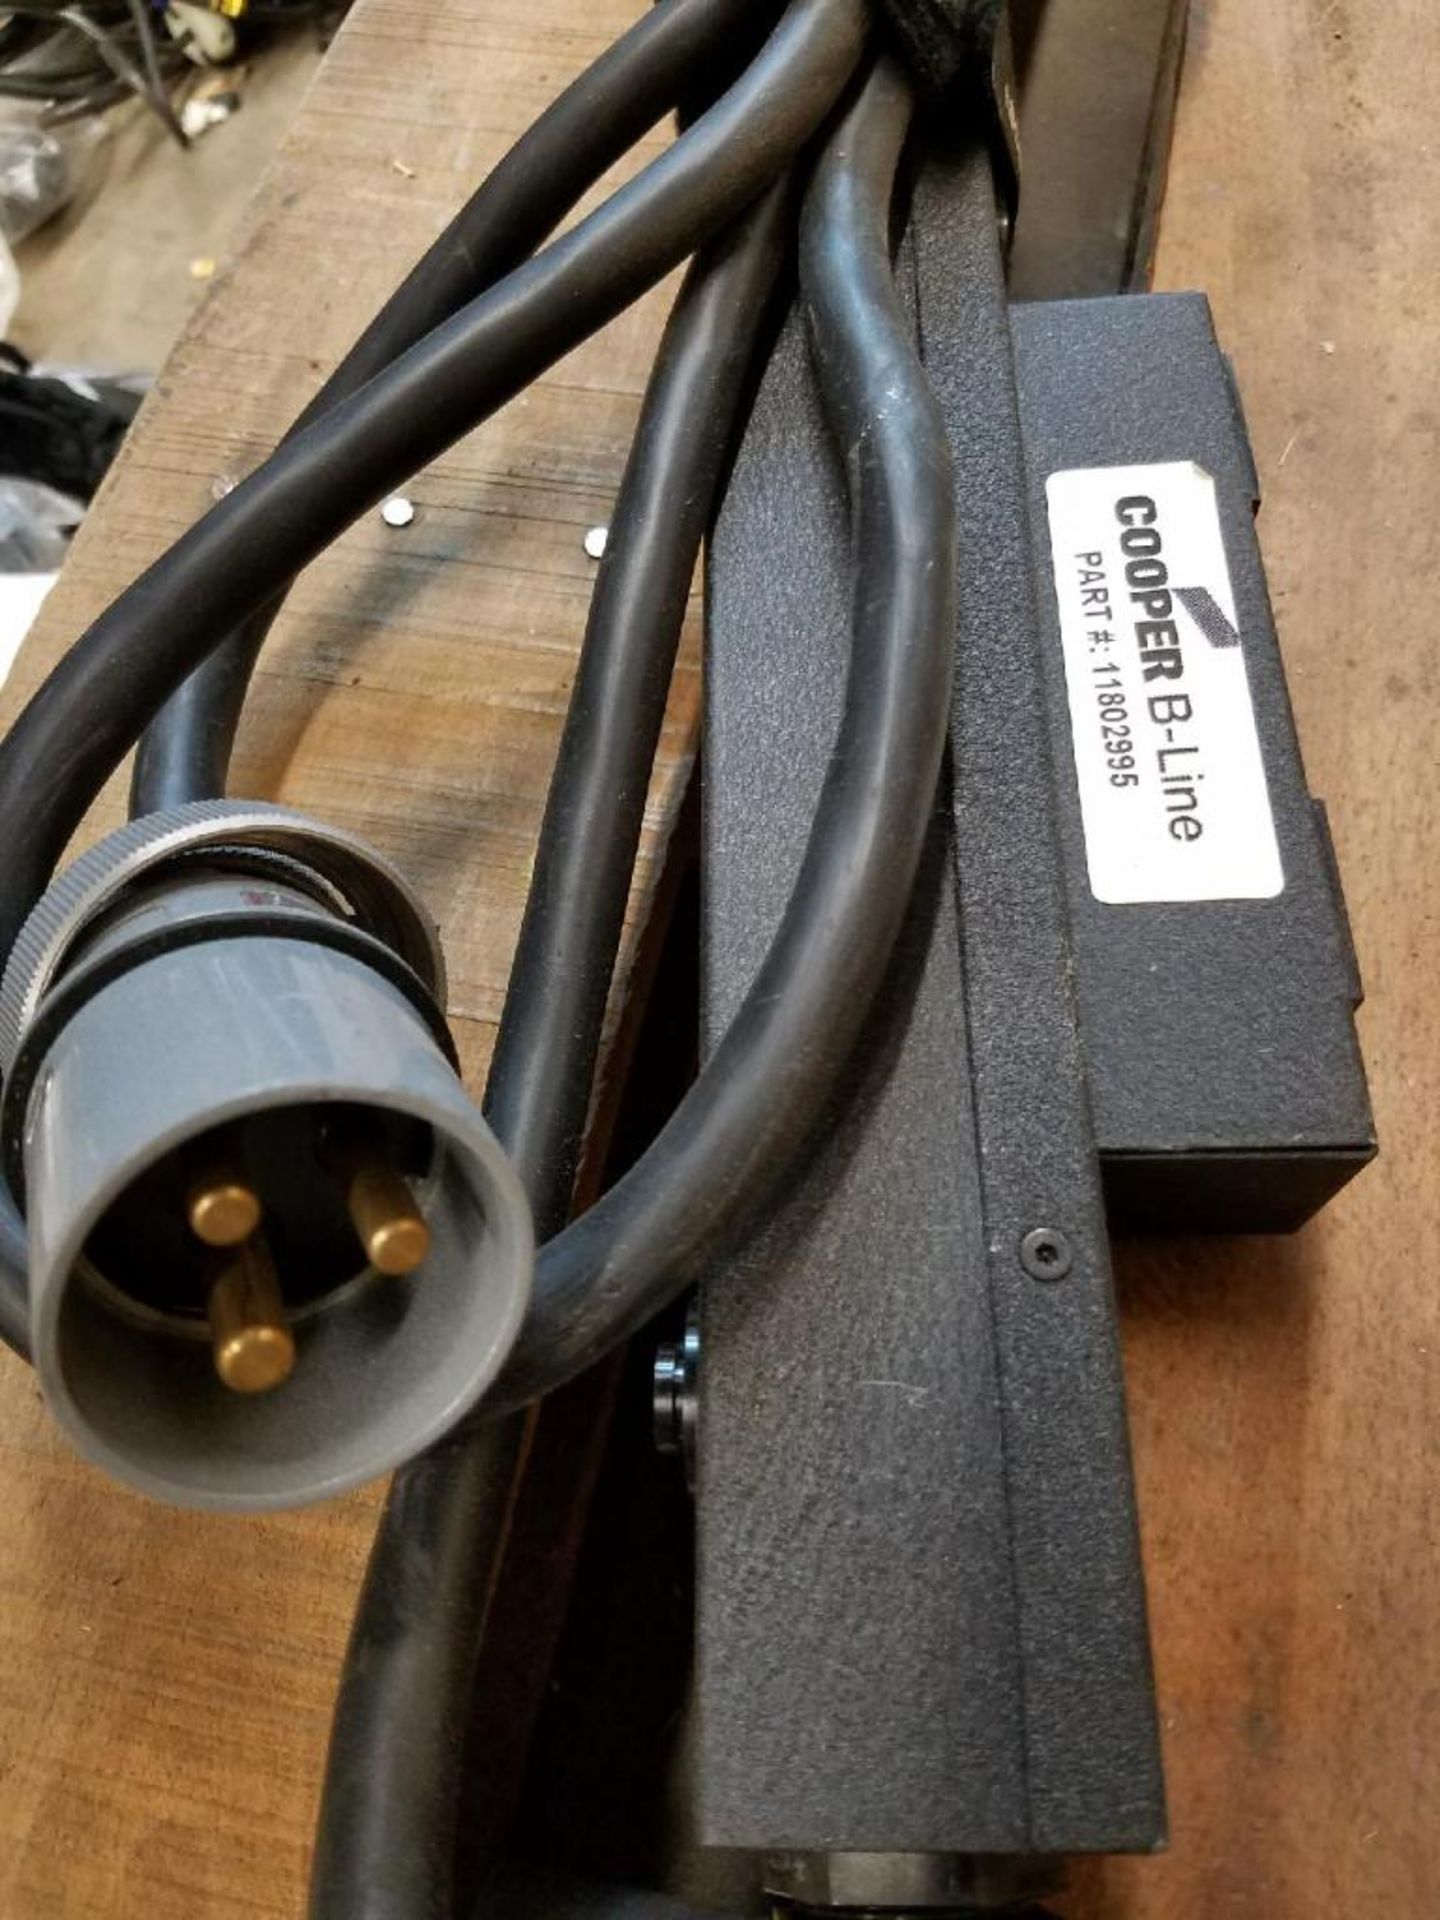 LARGE INDSUTRIAL POWER BAR SURGE PROTECTOR - Image 2 of 2